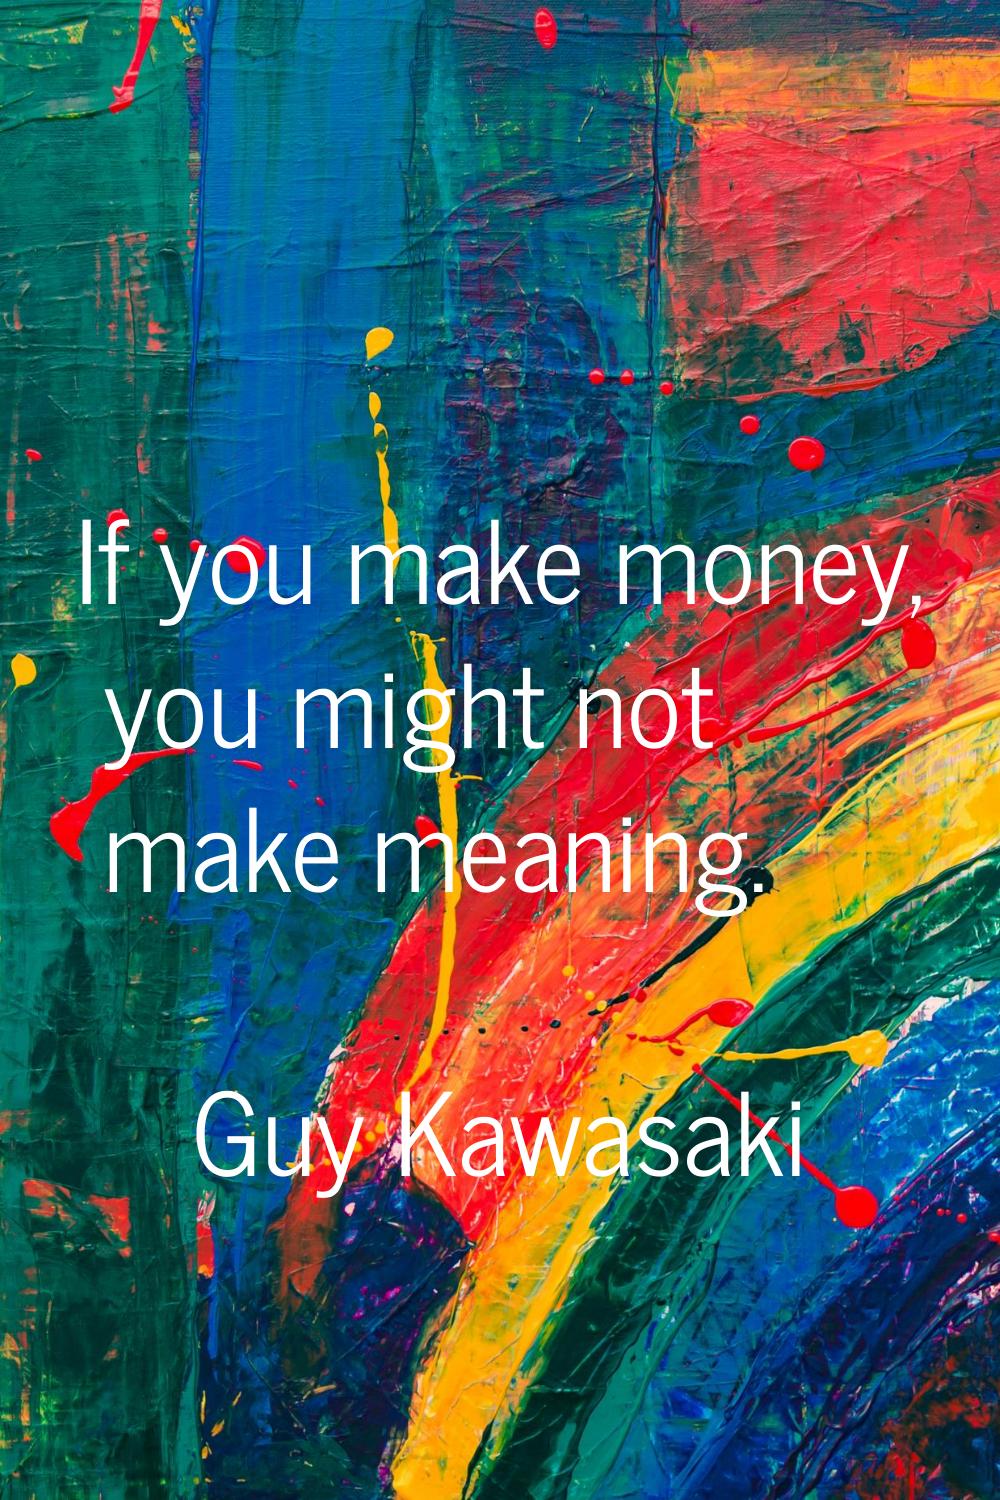 If you make money, you might not make meaning.